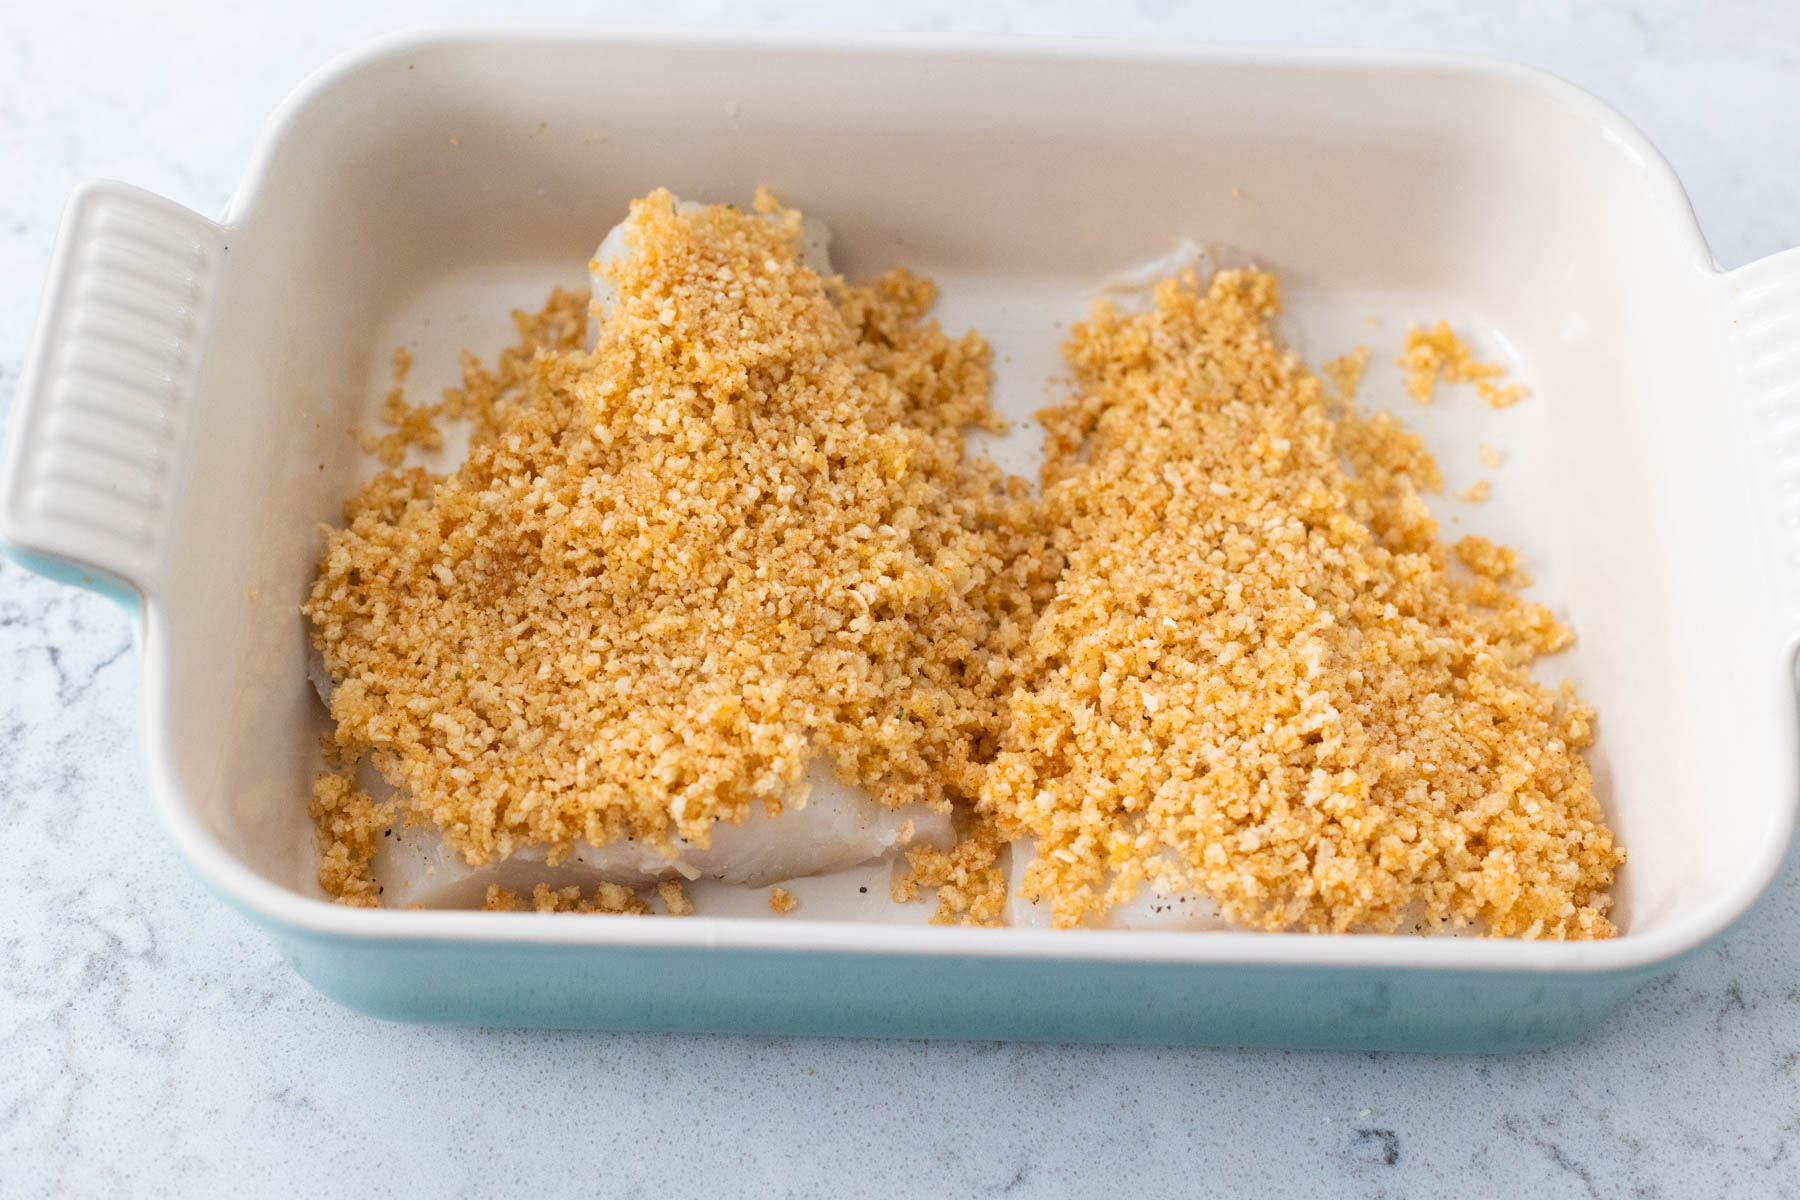 The fish filets have the breadcrumb mixture spread on top.